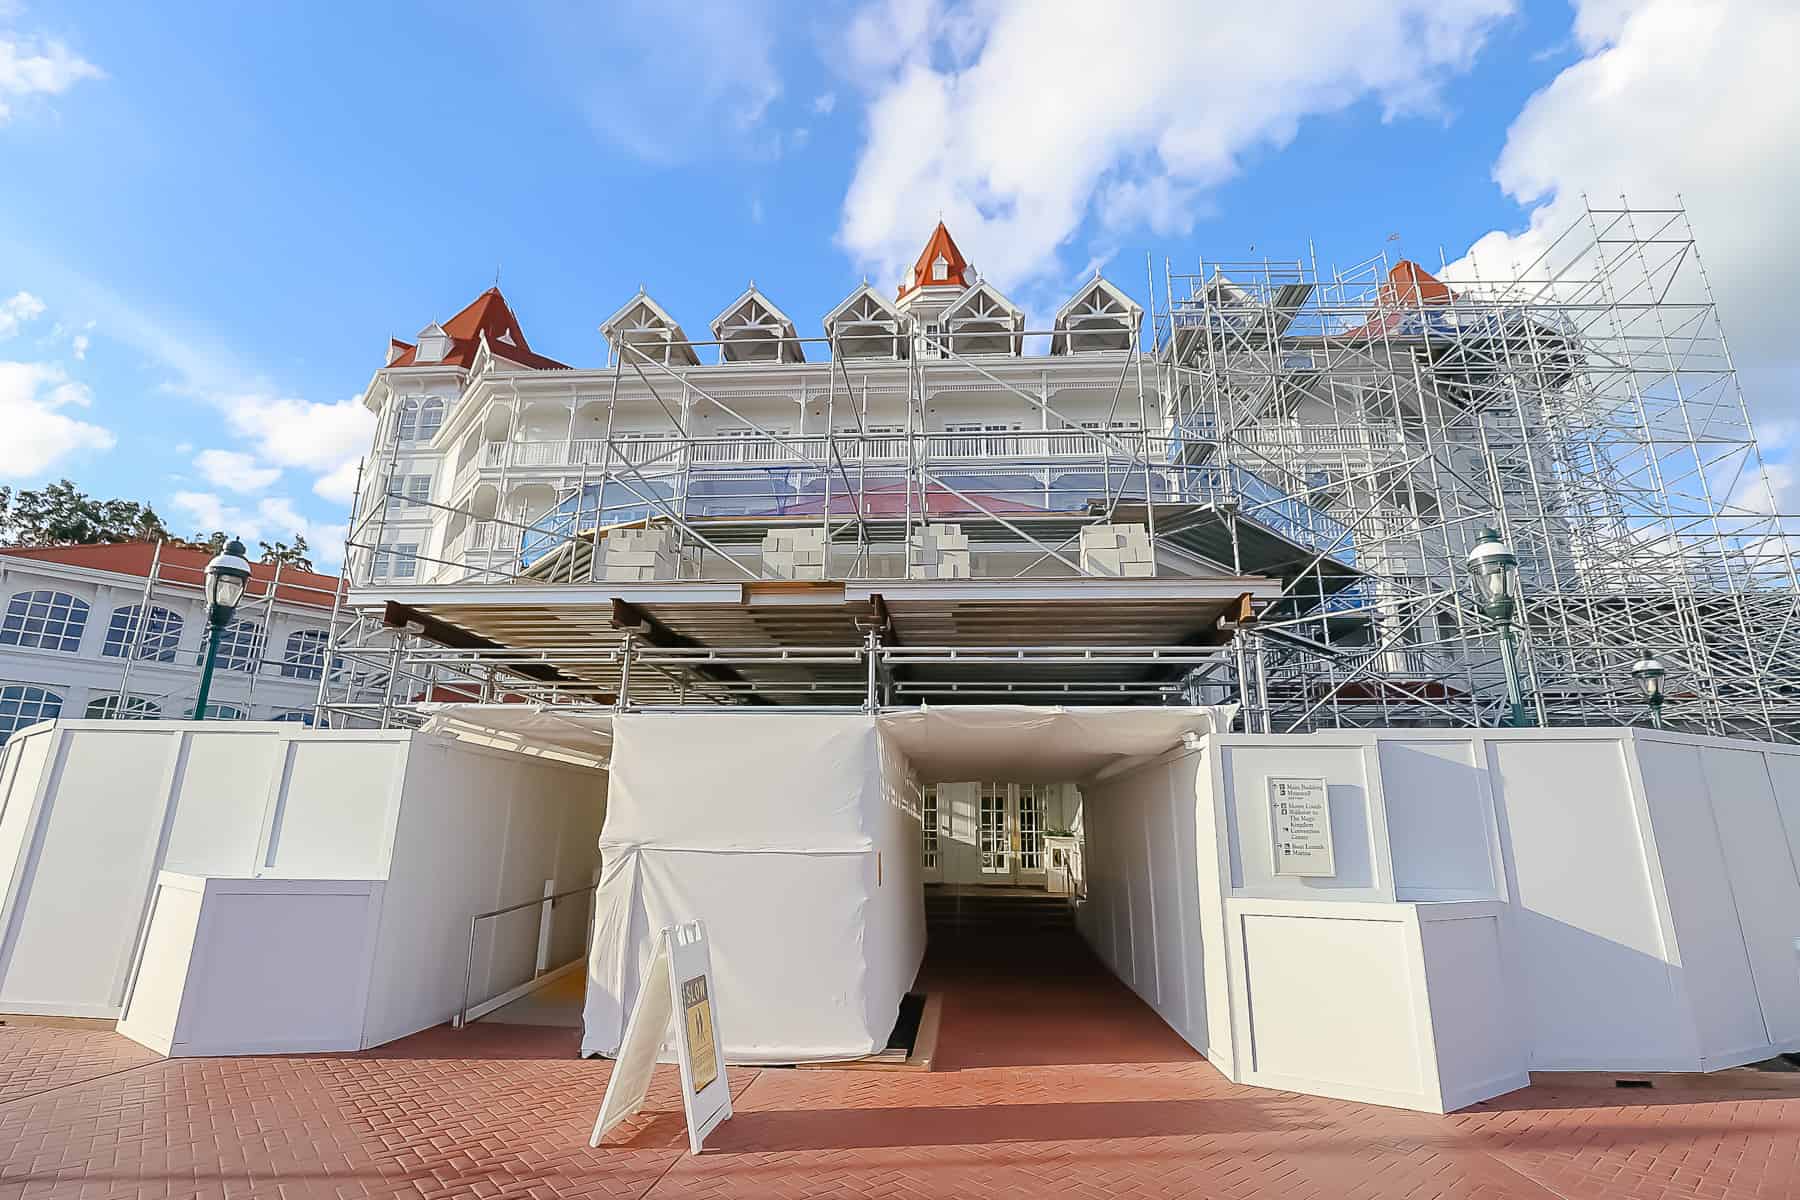 scaffolding covering the main building of Disney's Grand Floridian 